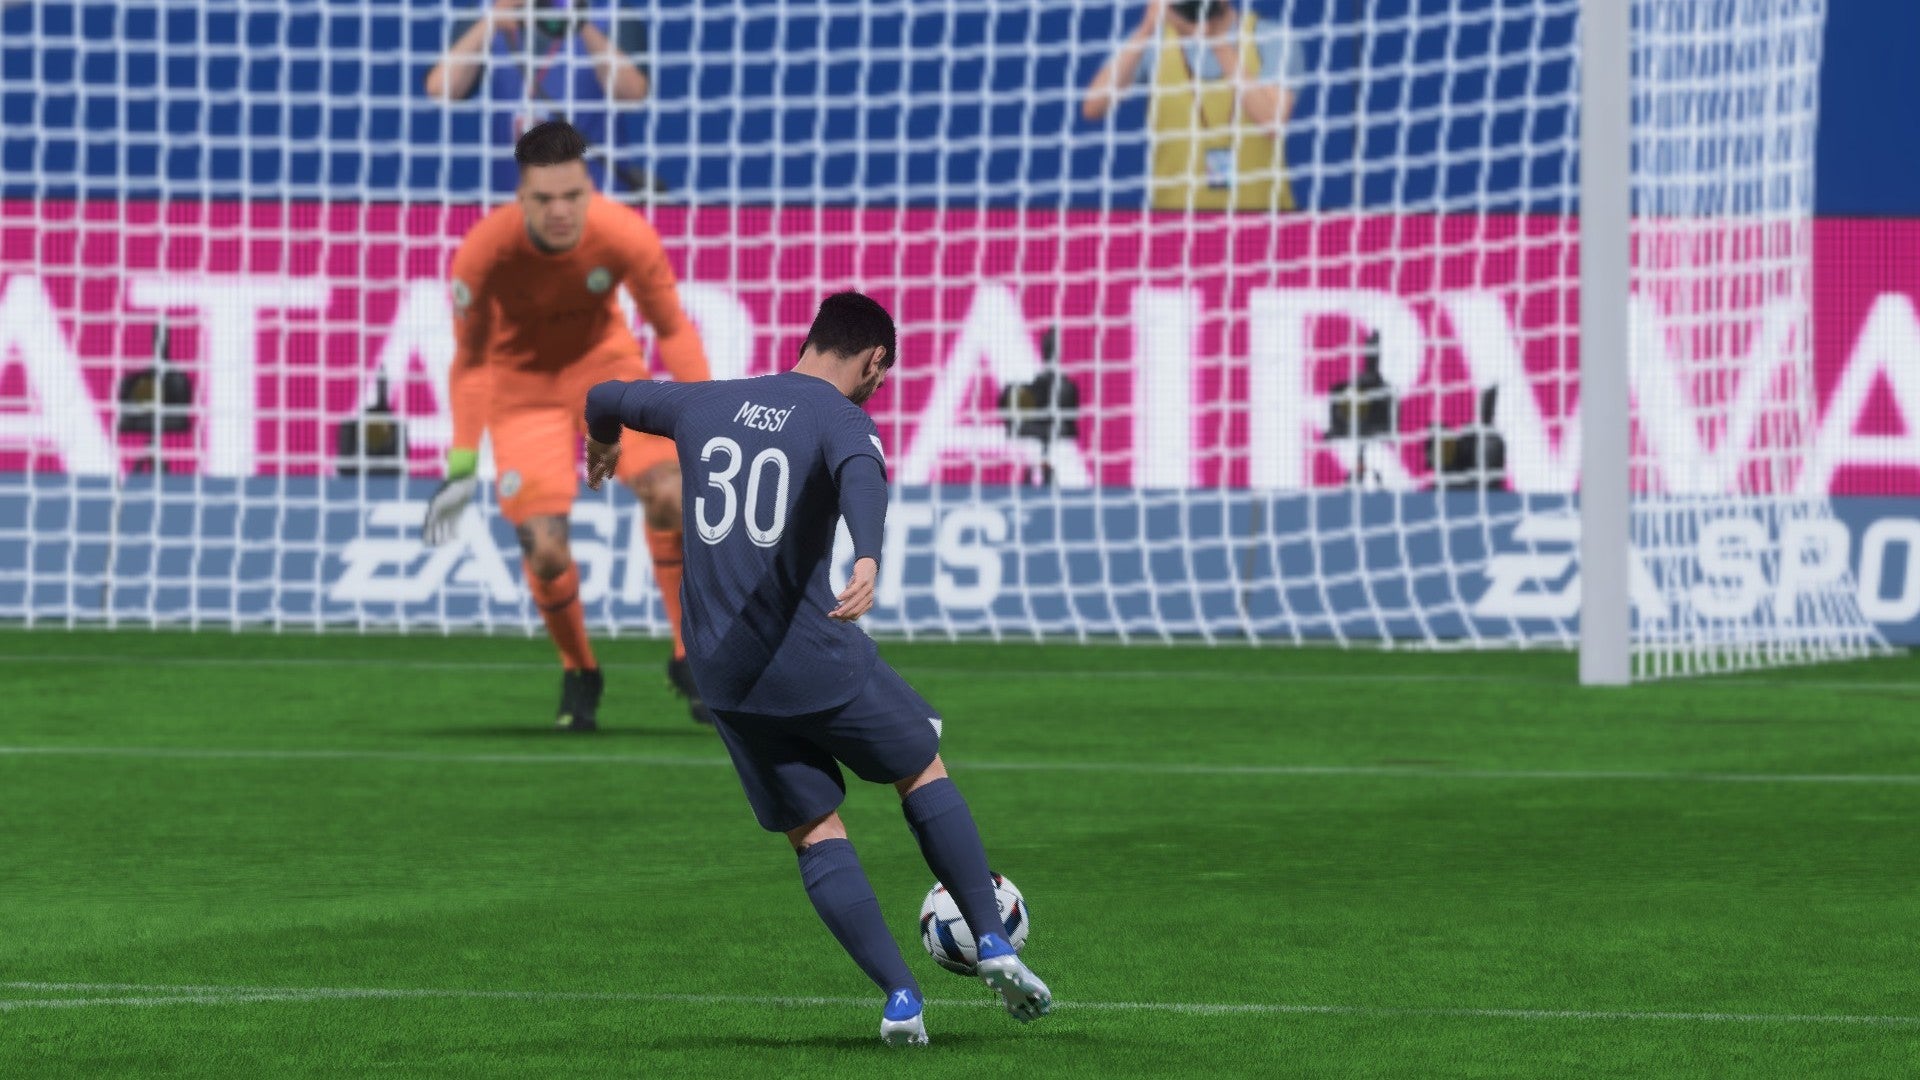 Messi taking a shot against the Man City goalkeeper in FIFA 23.